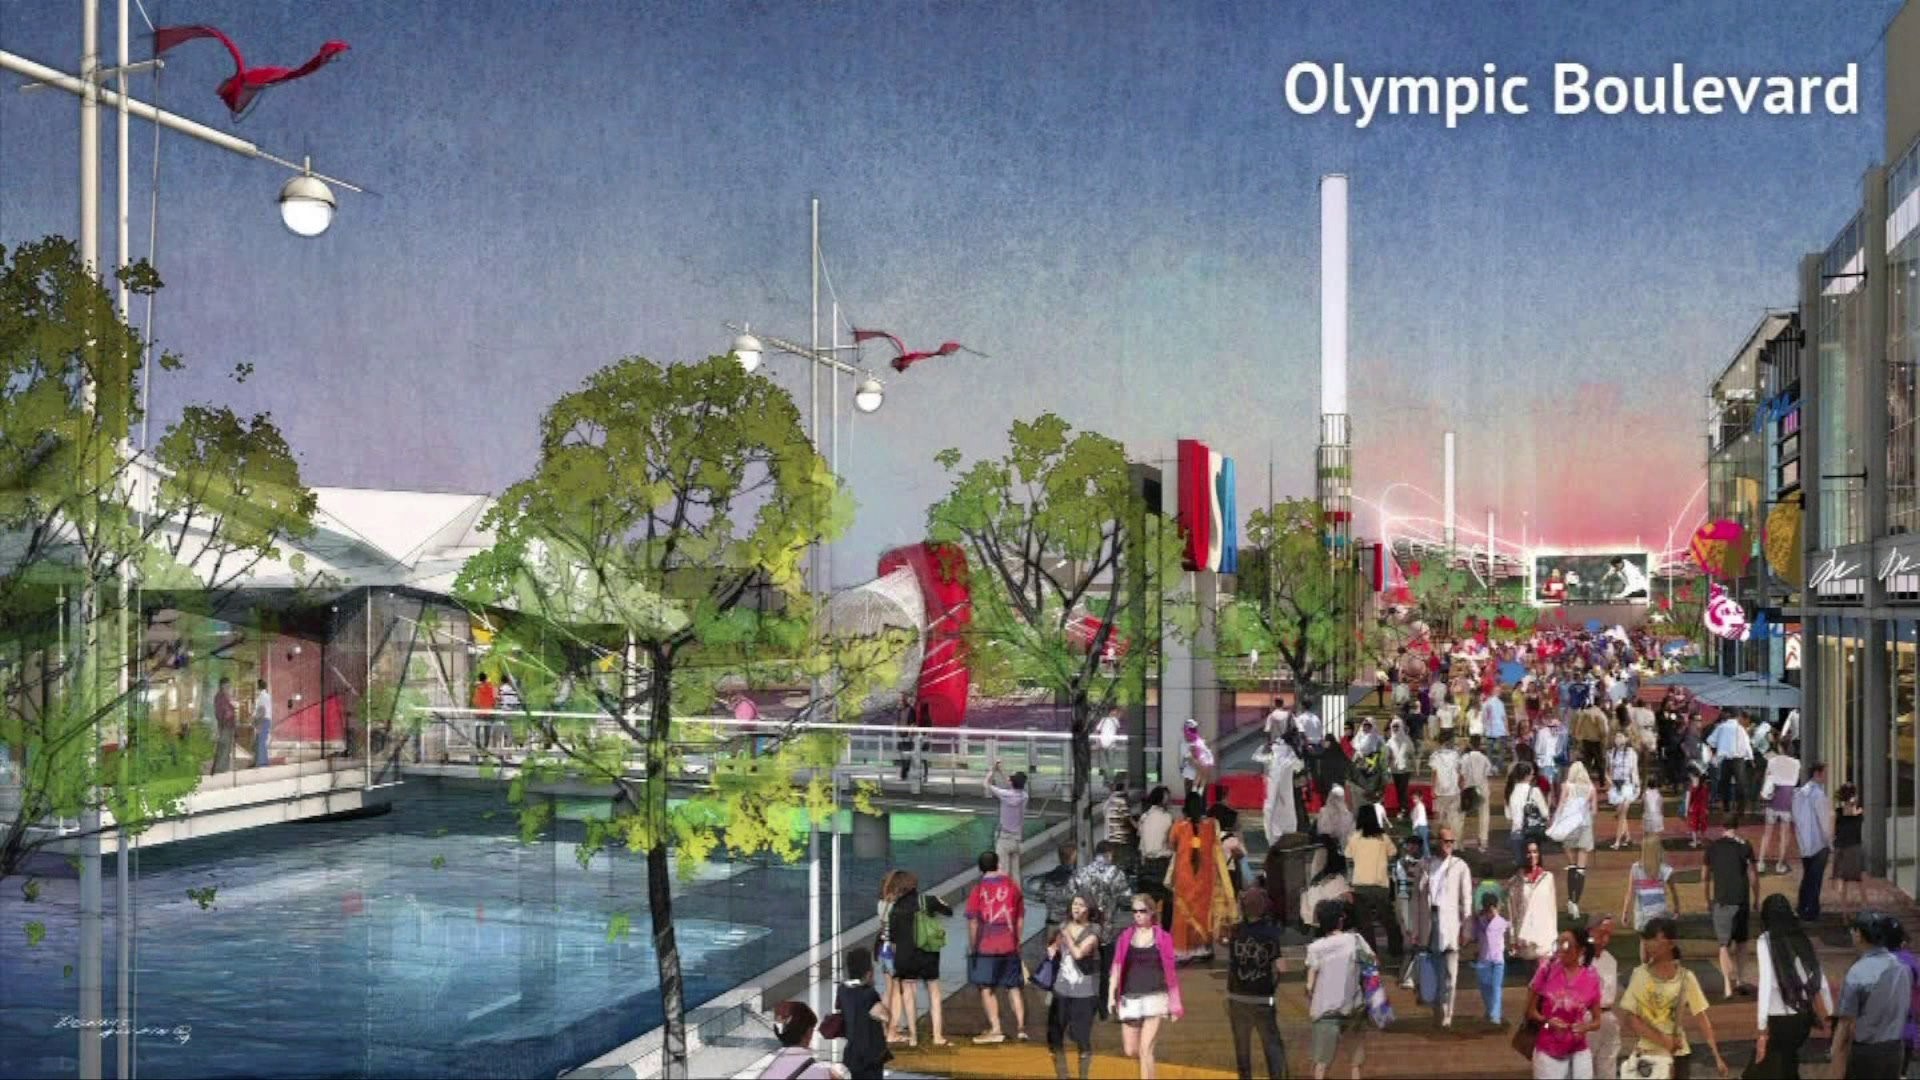 US Olympic Committee will look elsewhere for 2024 host city after